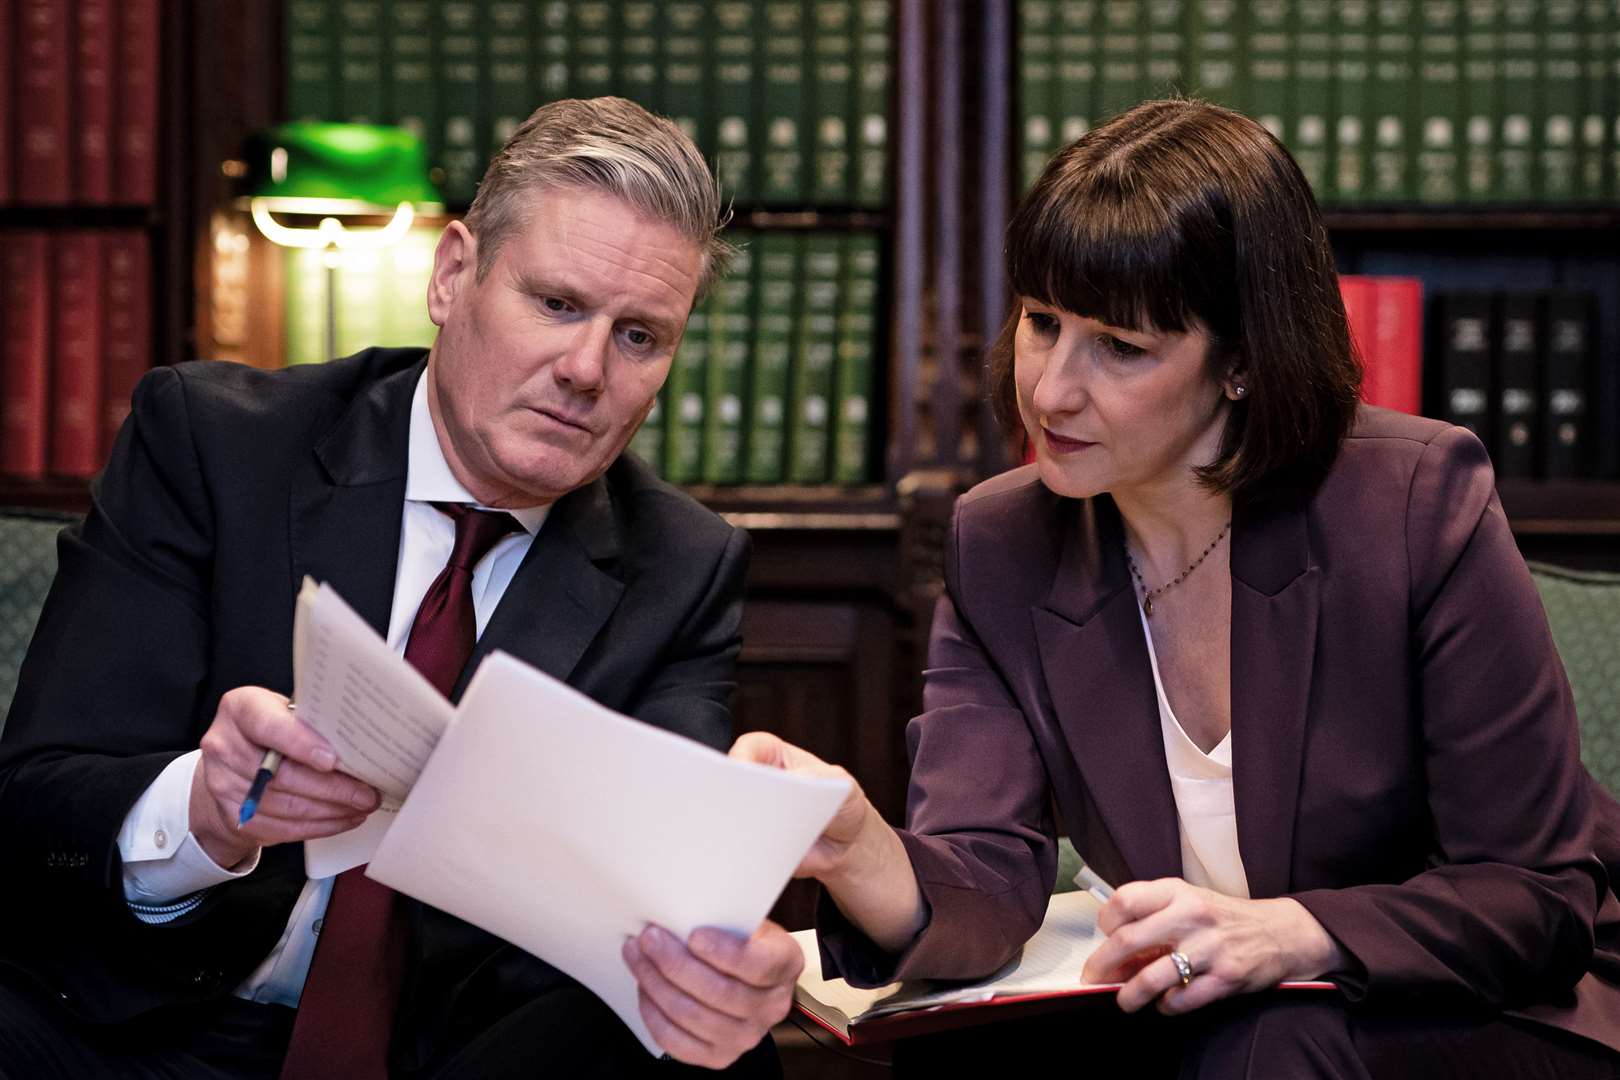 Labour leader Sir Keir Starmer and shadow chancellor Rachel Reeves were forced to draw up new spending plans after the Budget (Aaron Chown/PA)